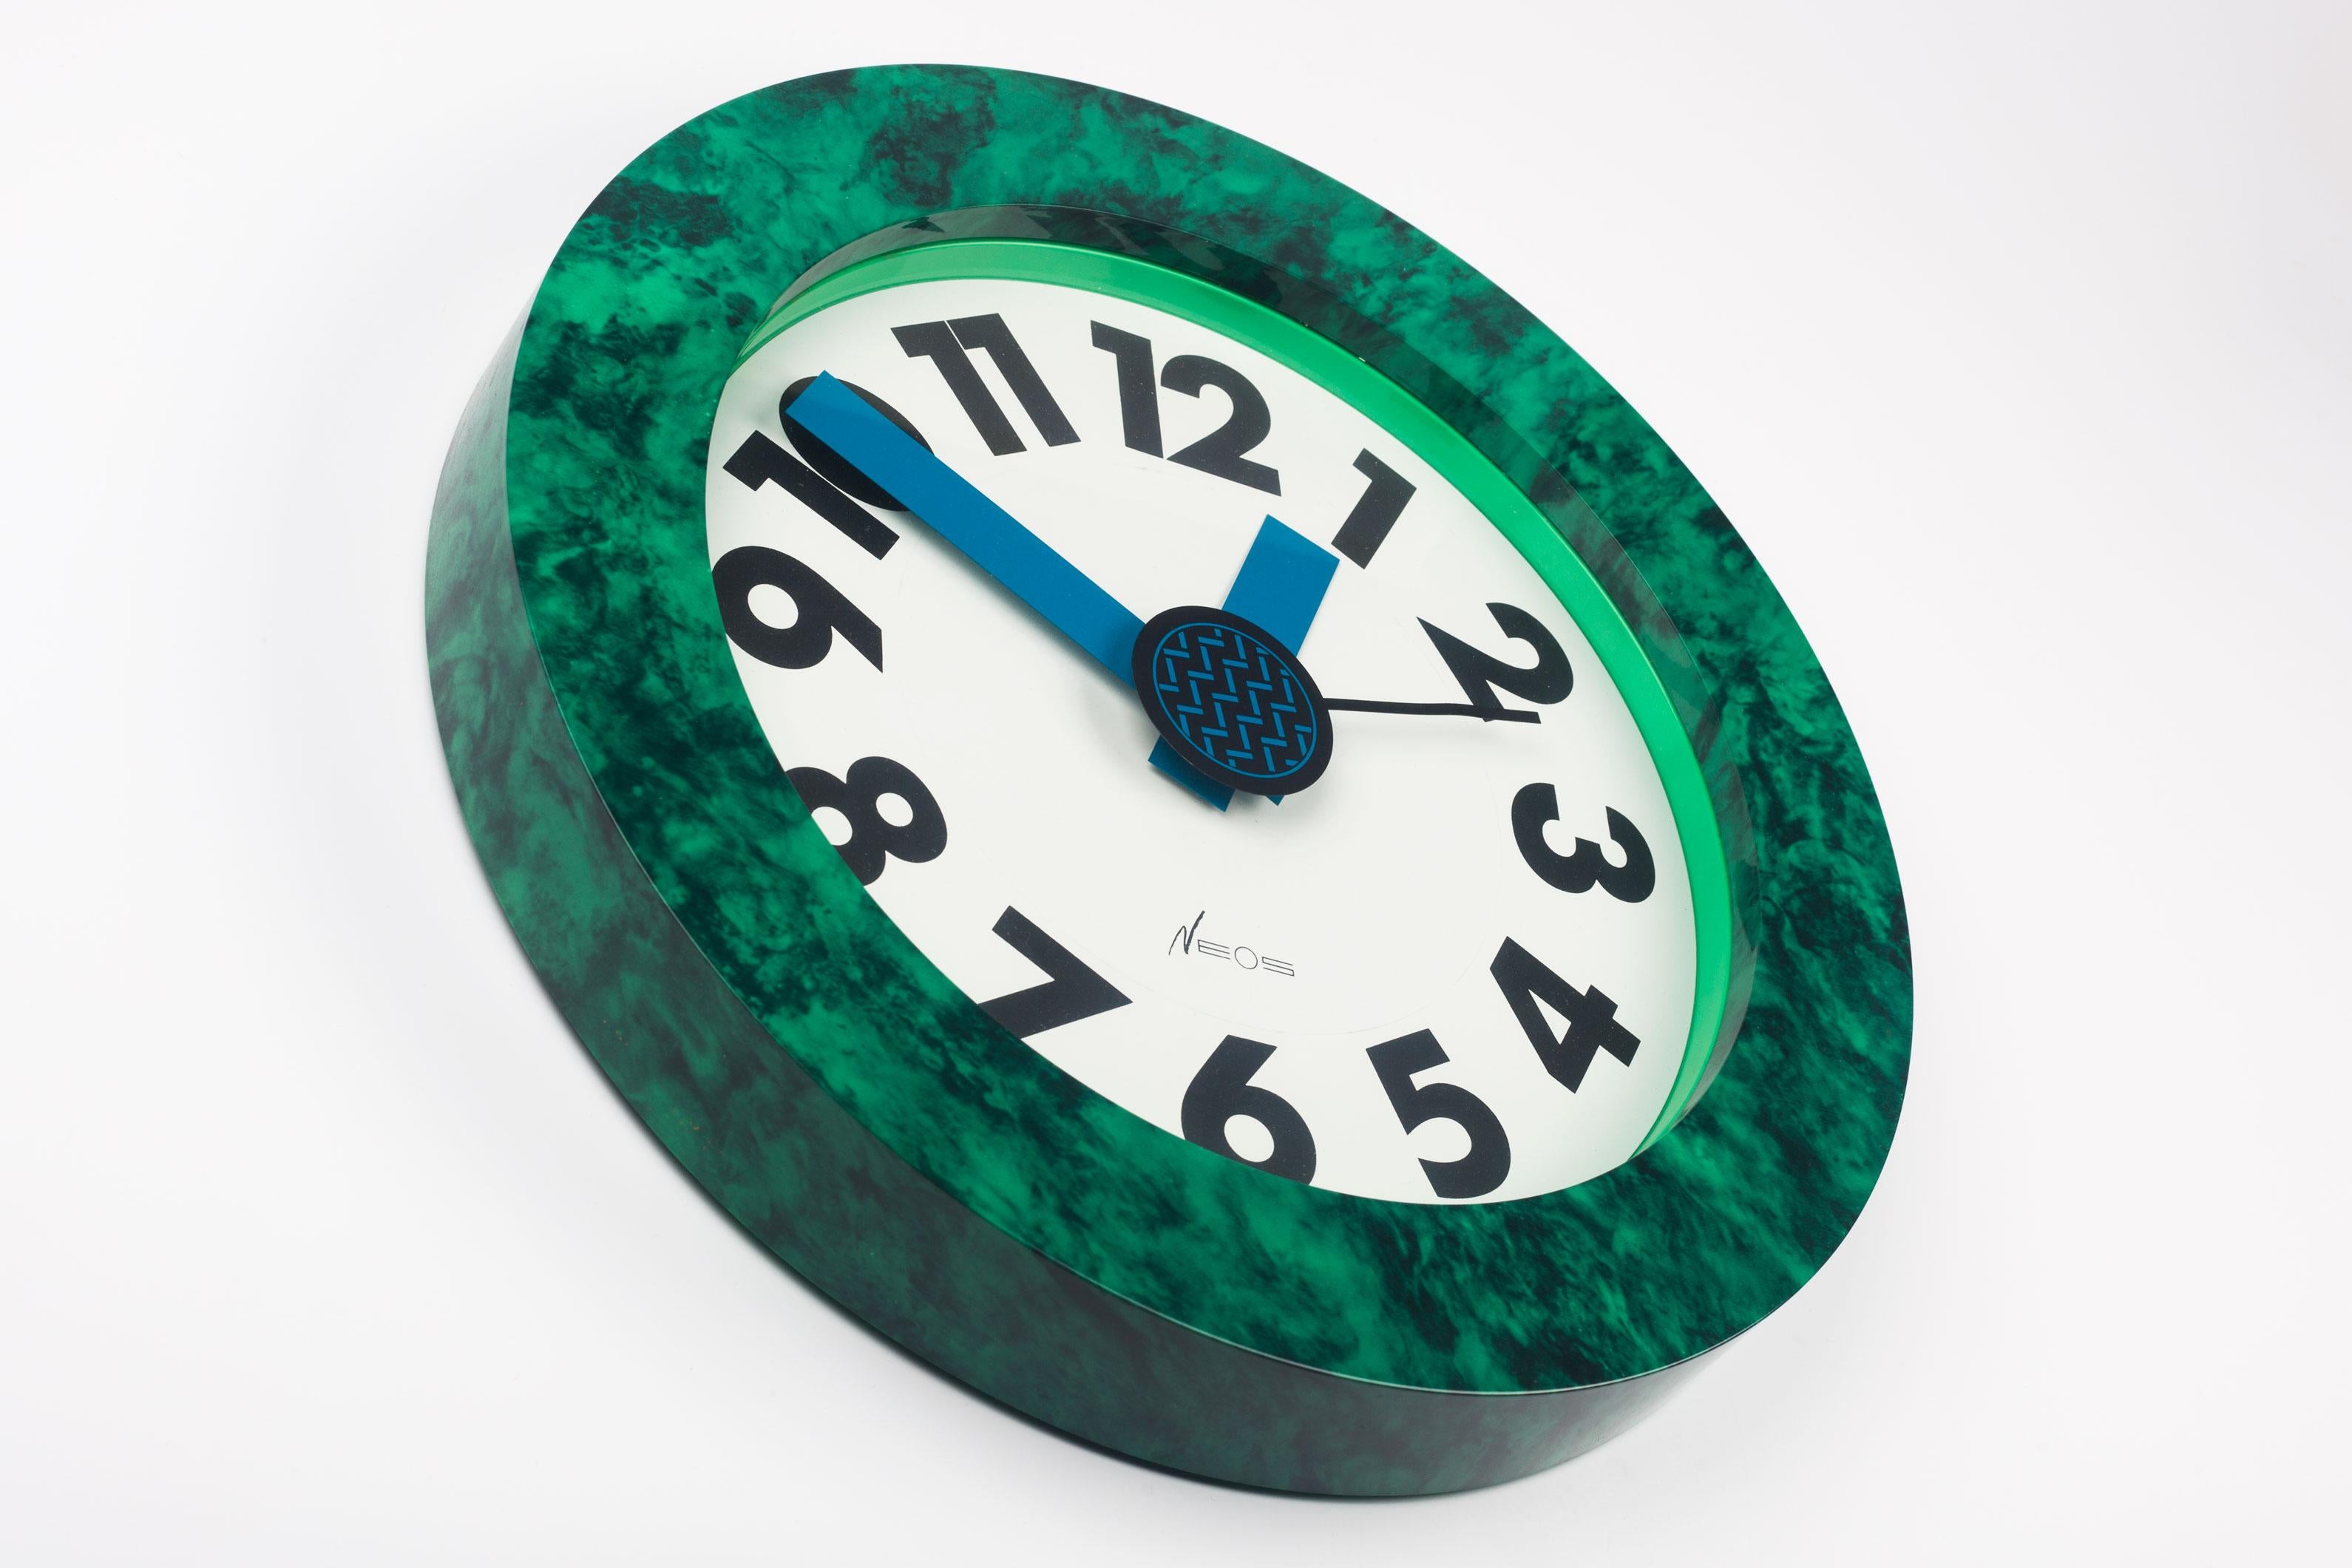 Italian Memphis Wall Clock Green Marble Pattern du Pasquier and Sowden, Neos Italy 1980s